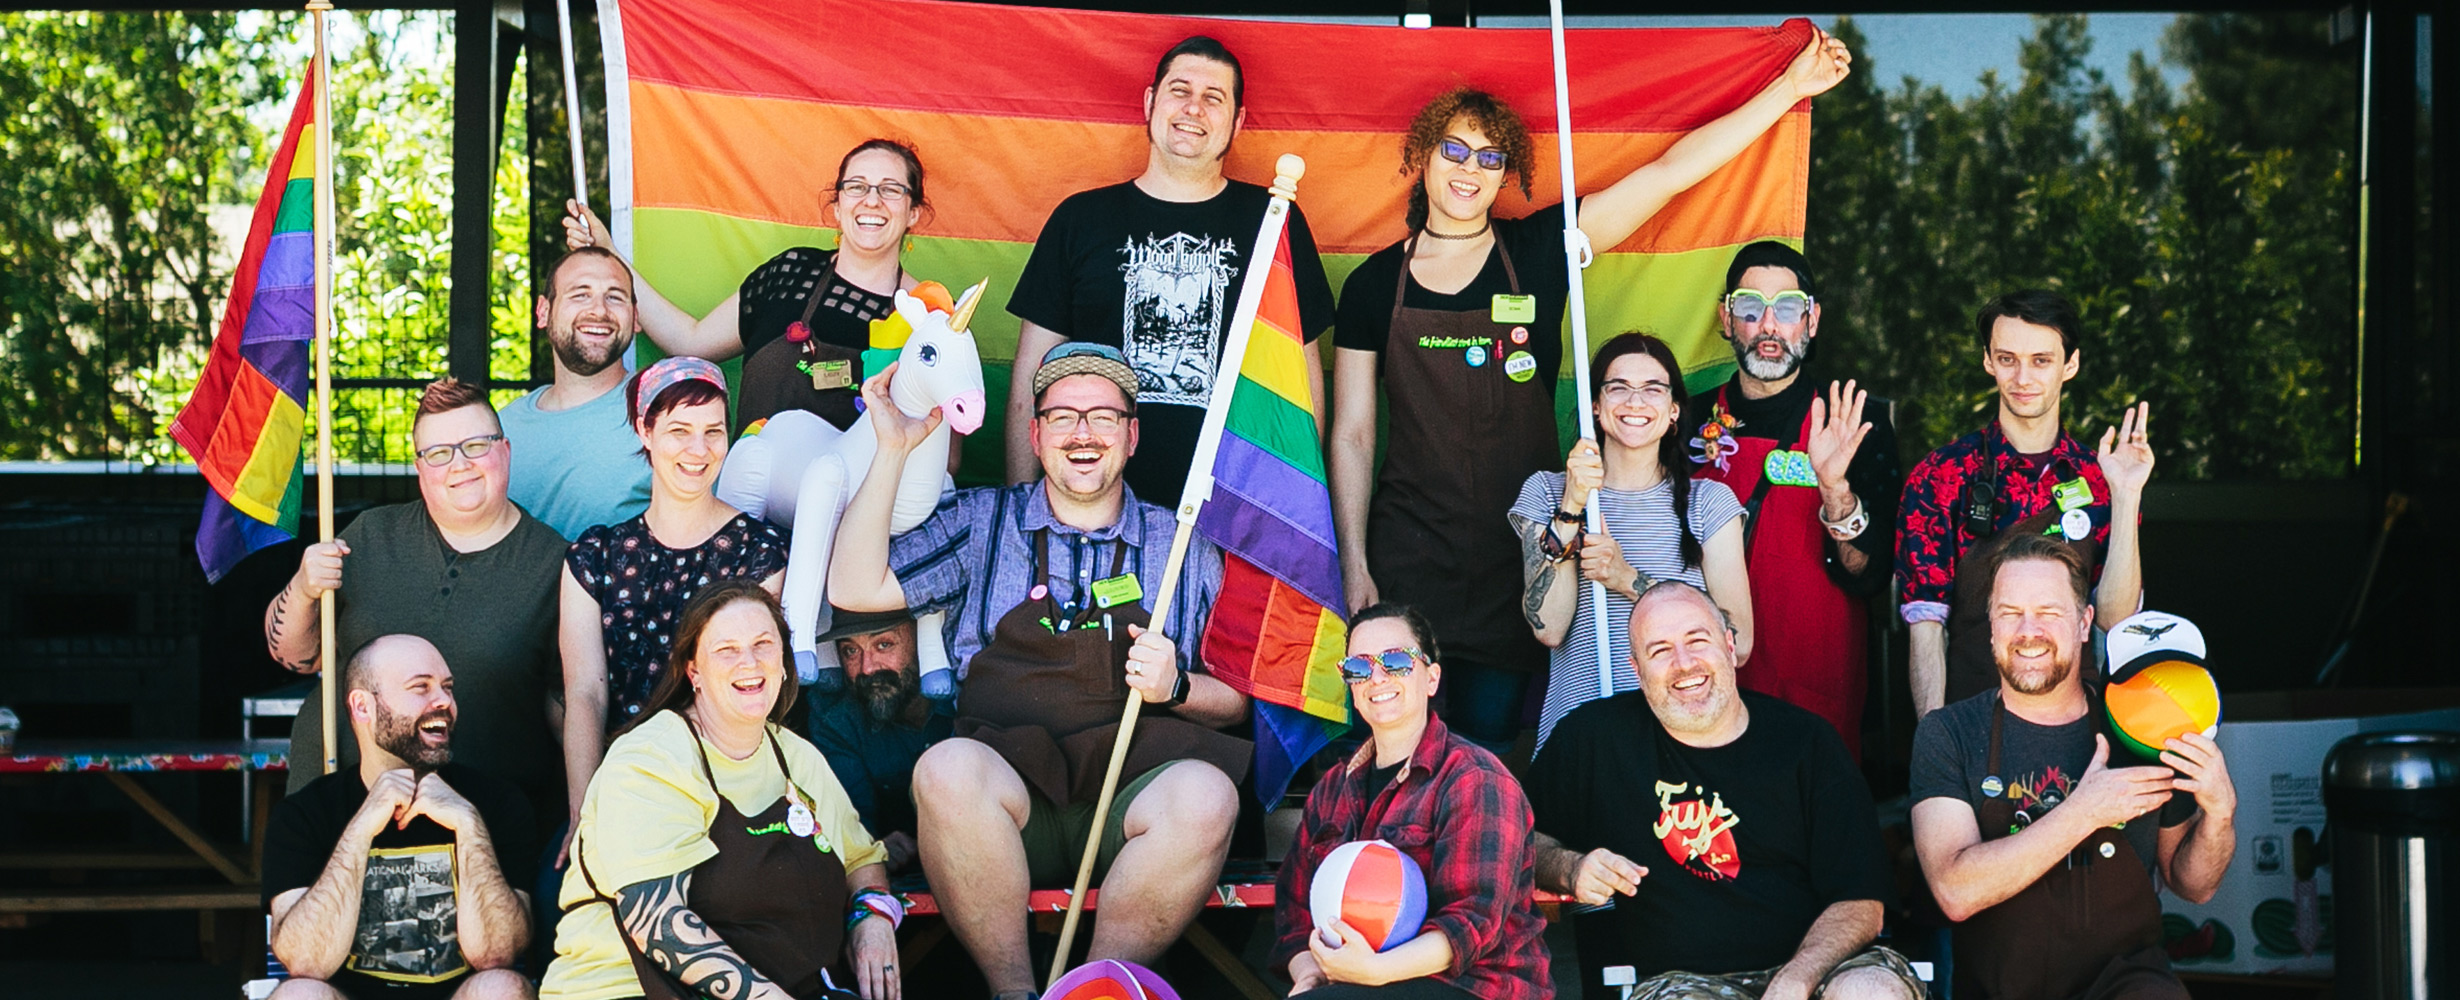 smiling new seasons market staff celebrating pride month with rainbow flags